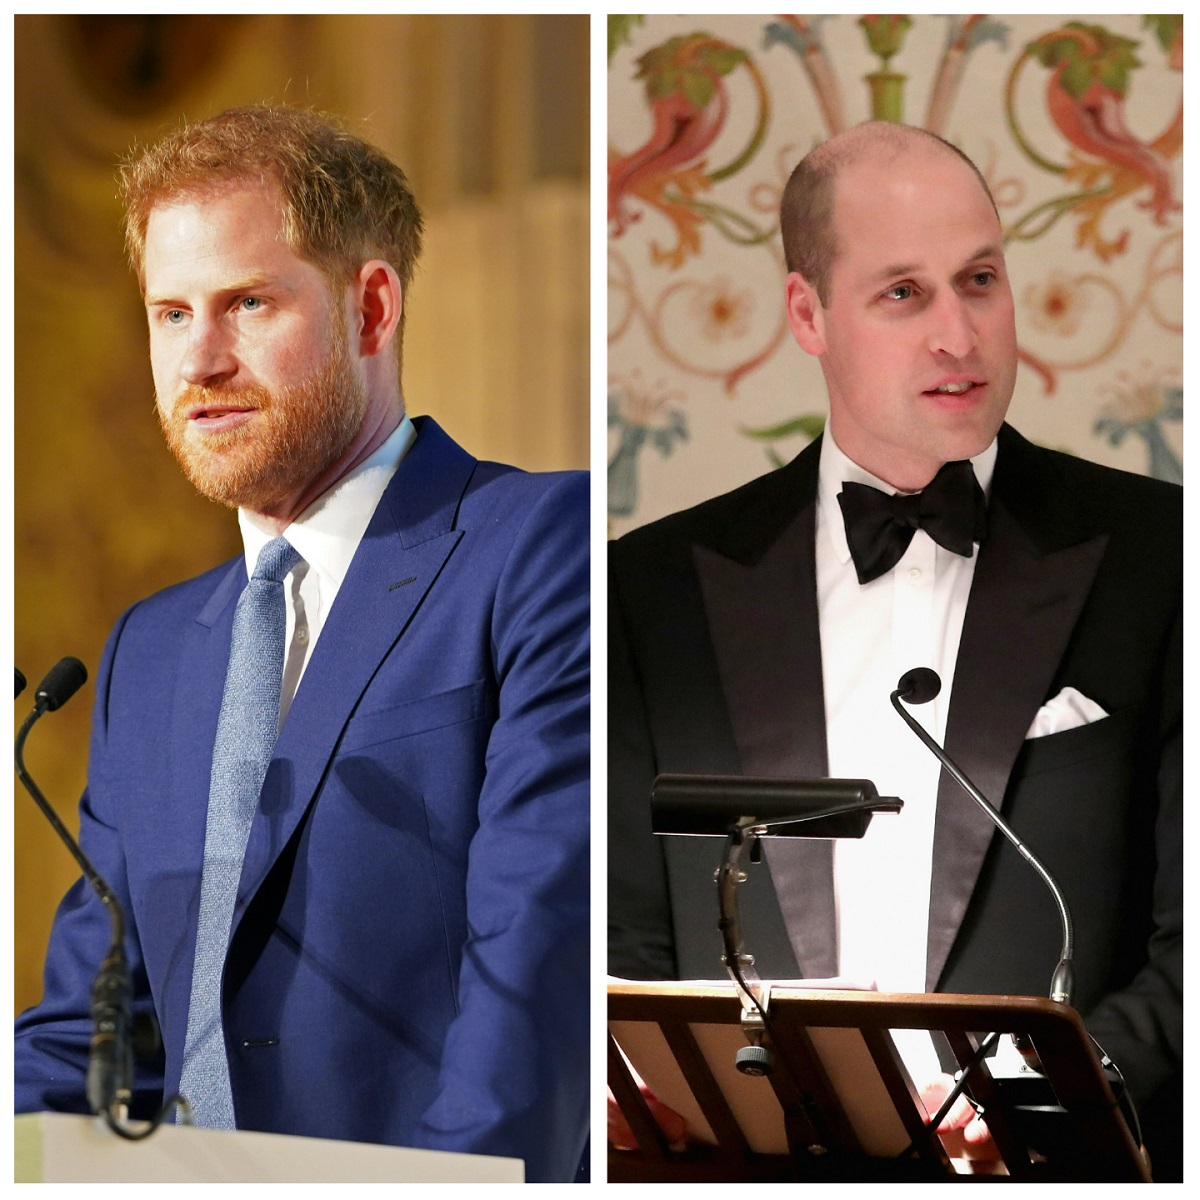 (L) Prince Harry, whose been accused of copying his brother;s speech, delivers remarks during award ceremony in London, (R) Prince William delivers a speech during dinner at the Royal Palace in Norway